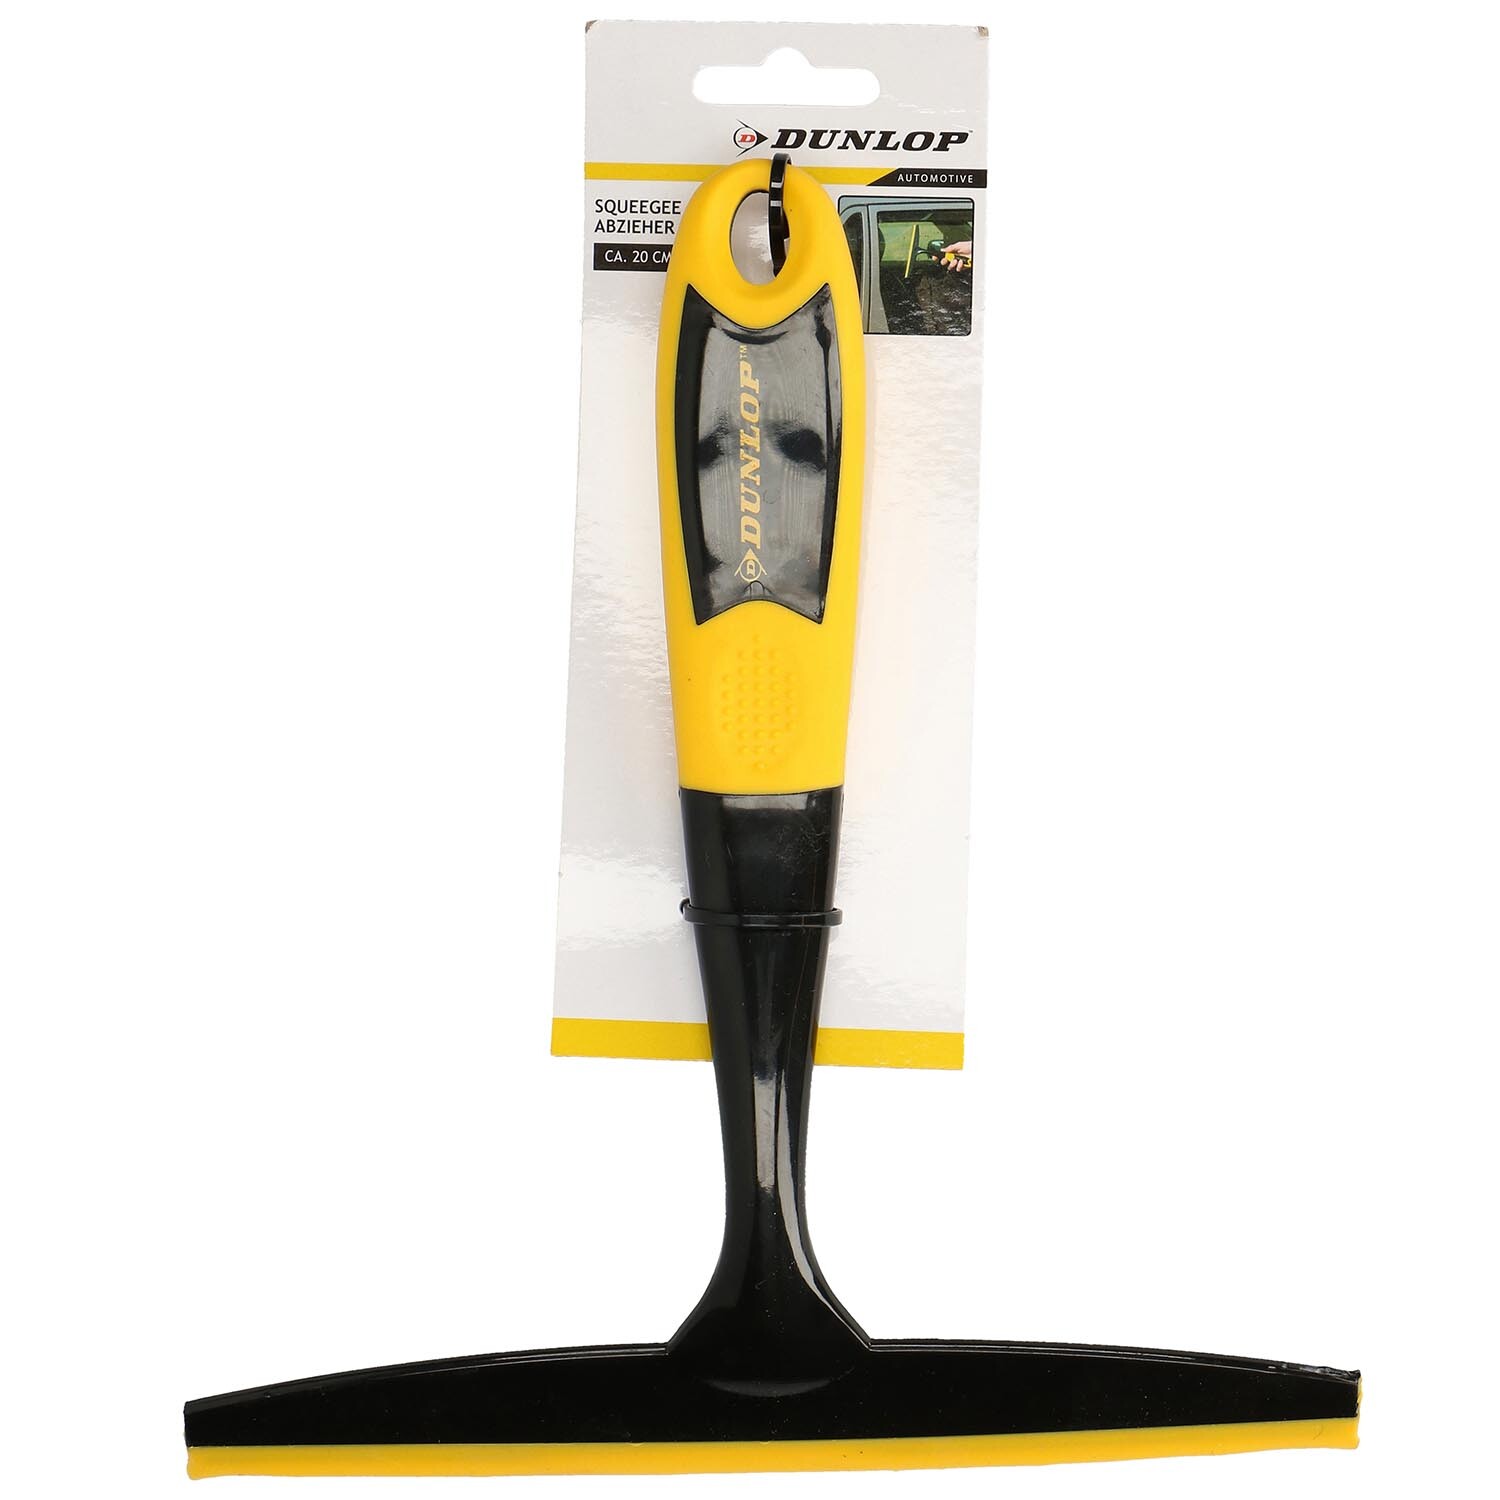 Dunlop Squeegee 20x23cm - Black/Yellow Image